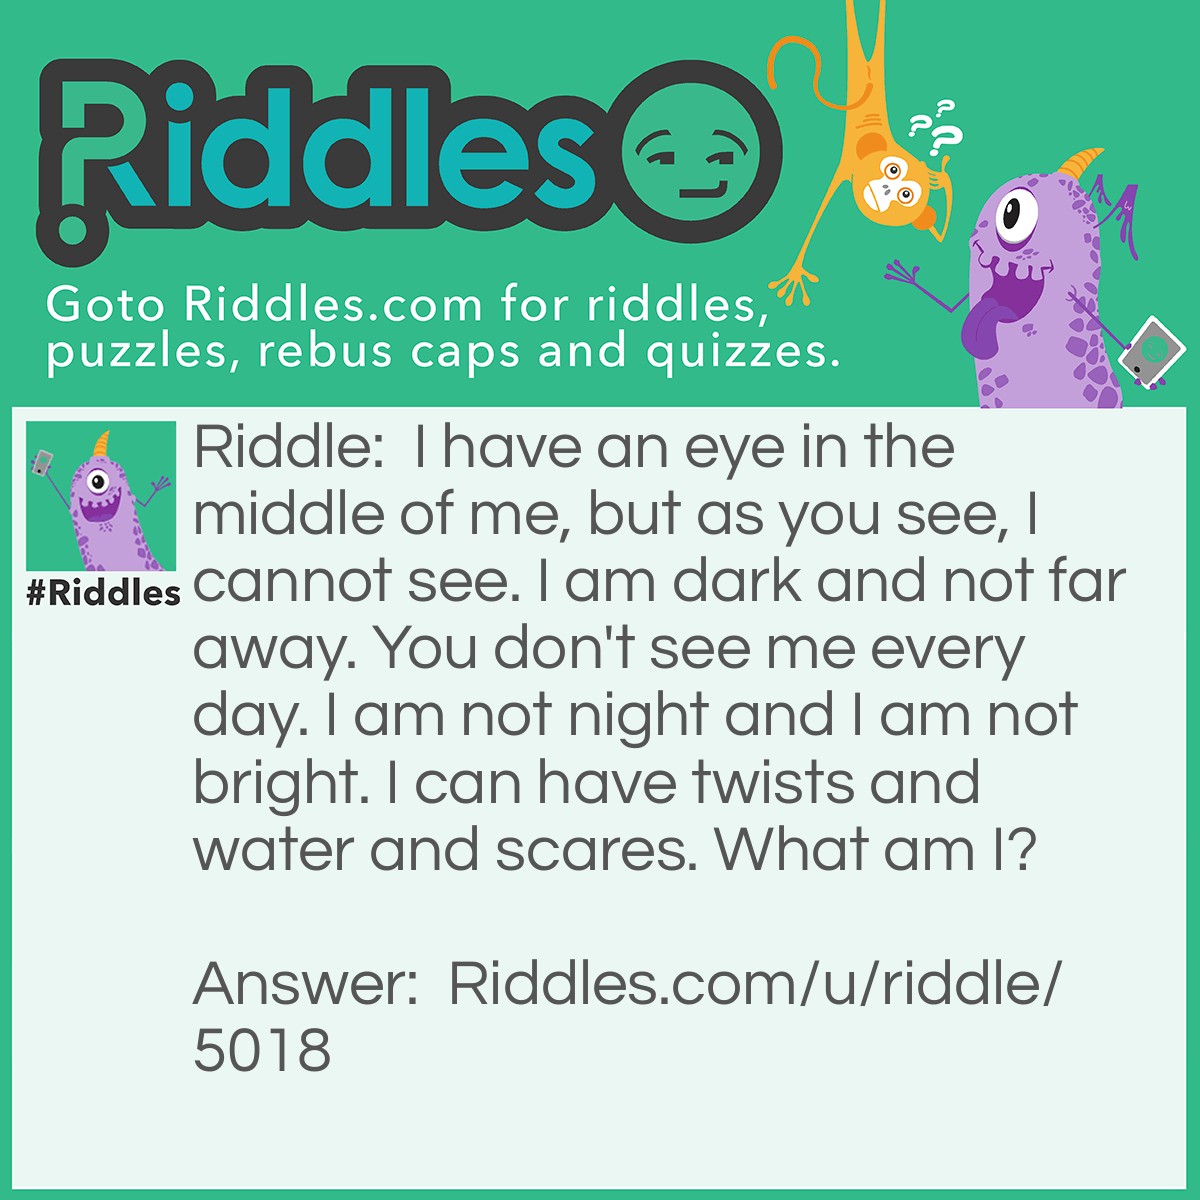 Riddle: I have an eye in the middle of me, but as you see, I cannot see. I am dark and not far away. You don't see me every day. I am not night and I am not bright. I can have twists and water and scares. What am I? Answer: A hurricane.